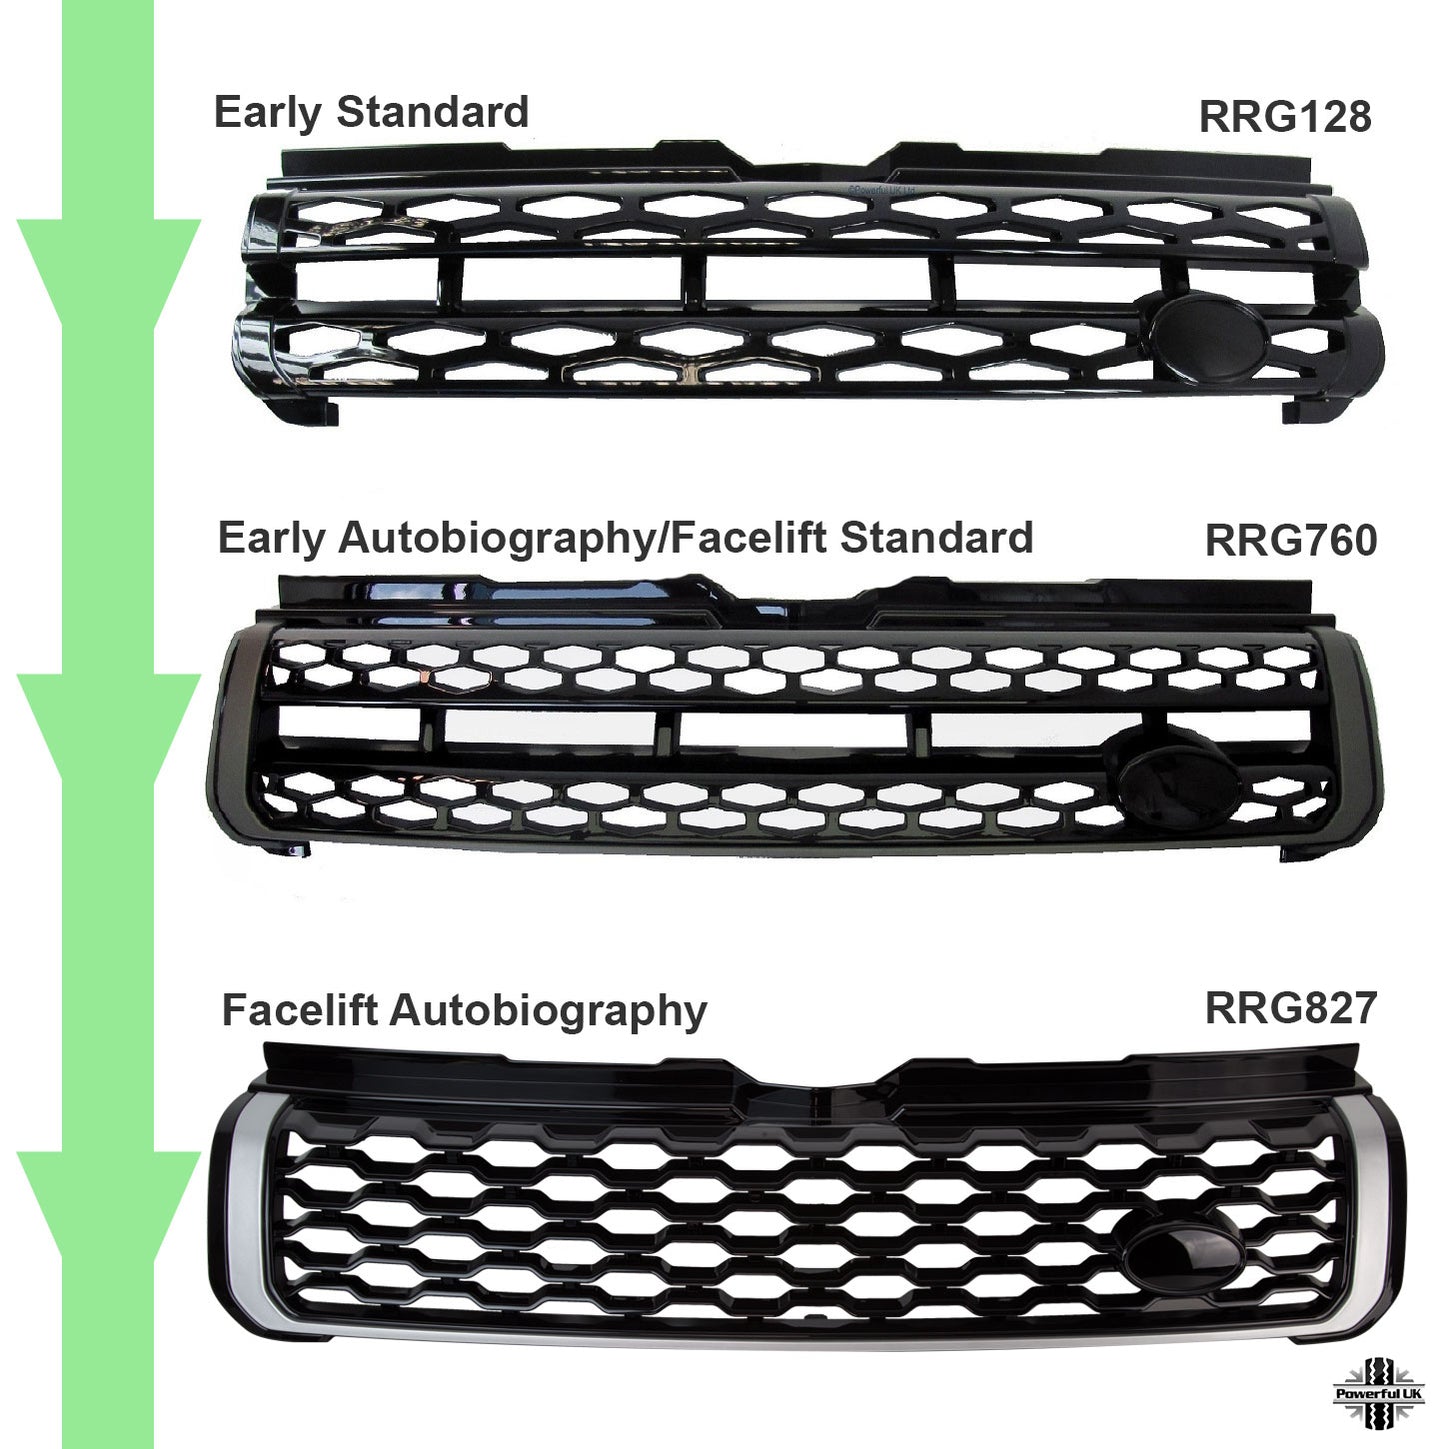 Front Grille - 2016 "Autobiography Style" - Gloss Black & Grey for Range Rover Evoque